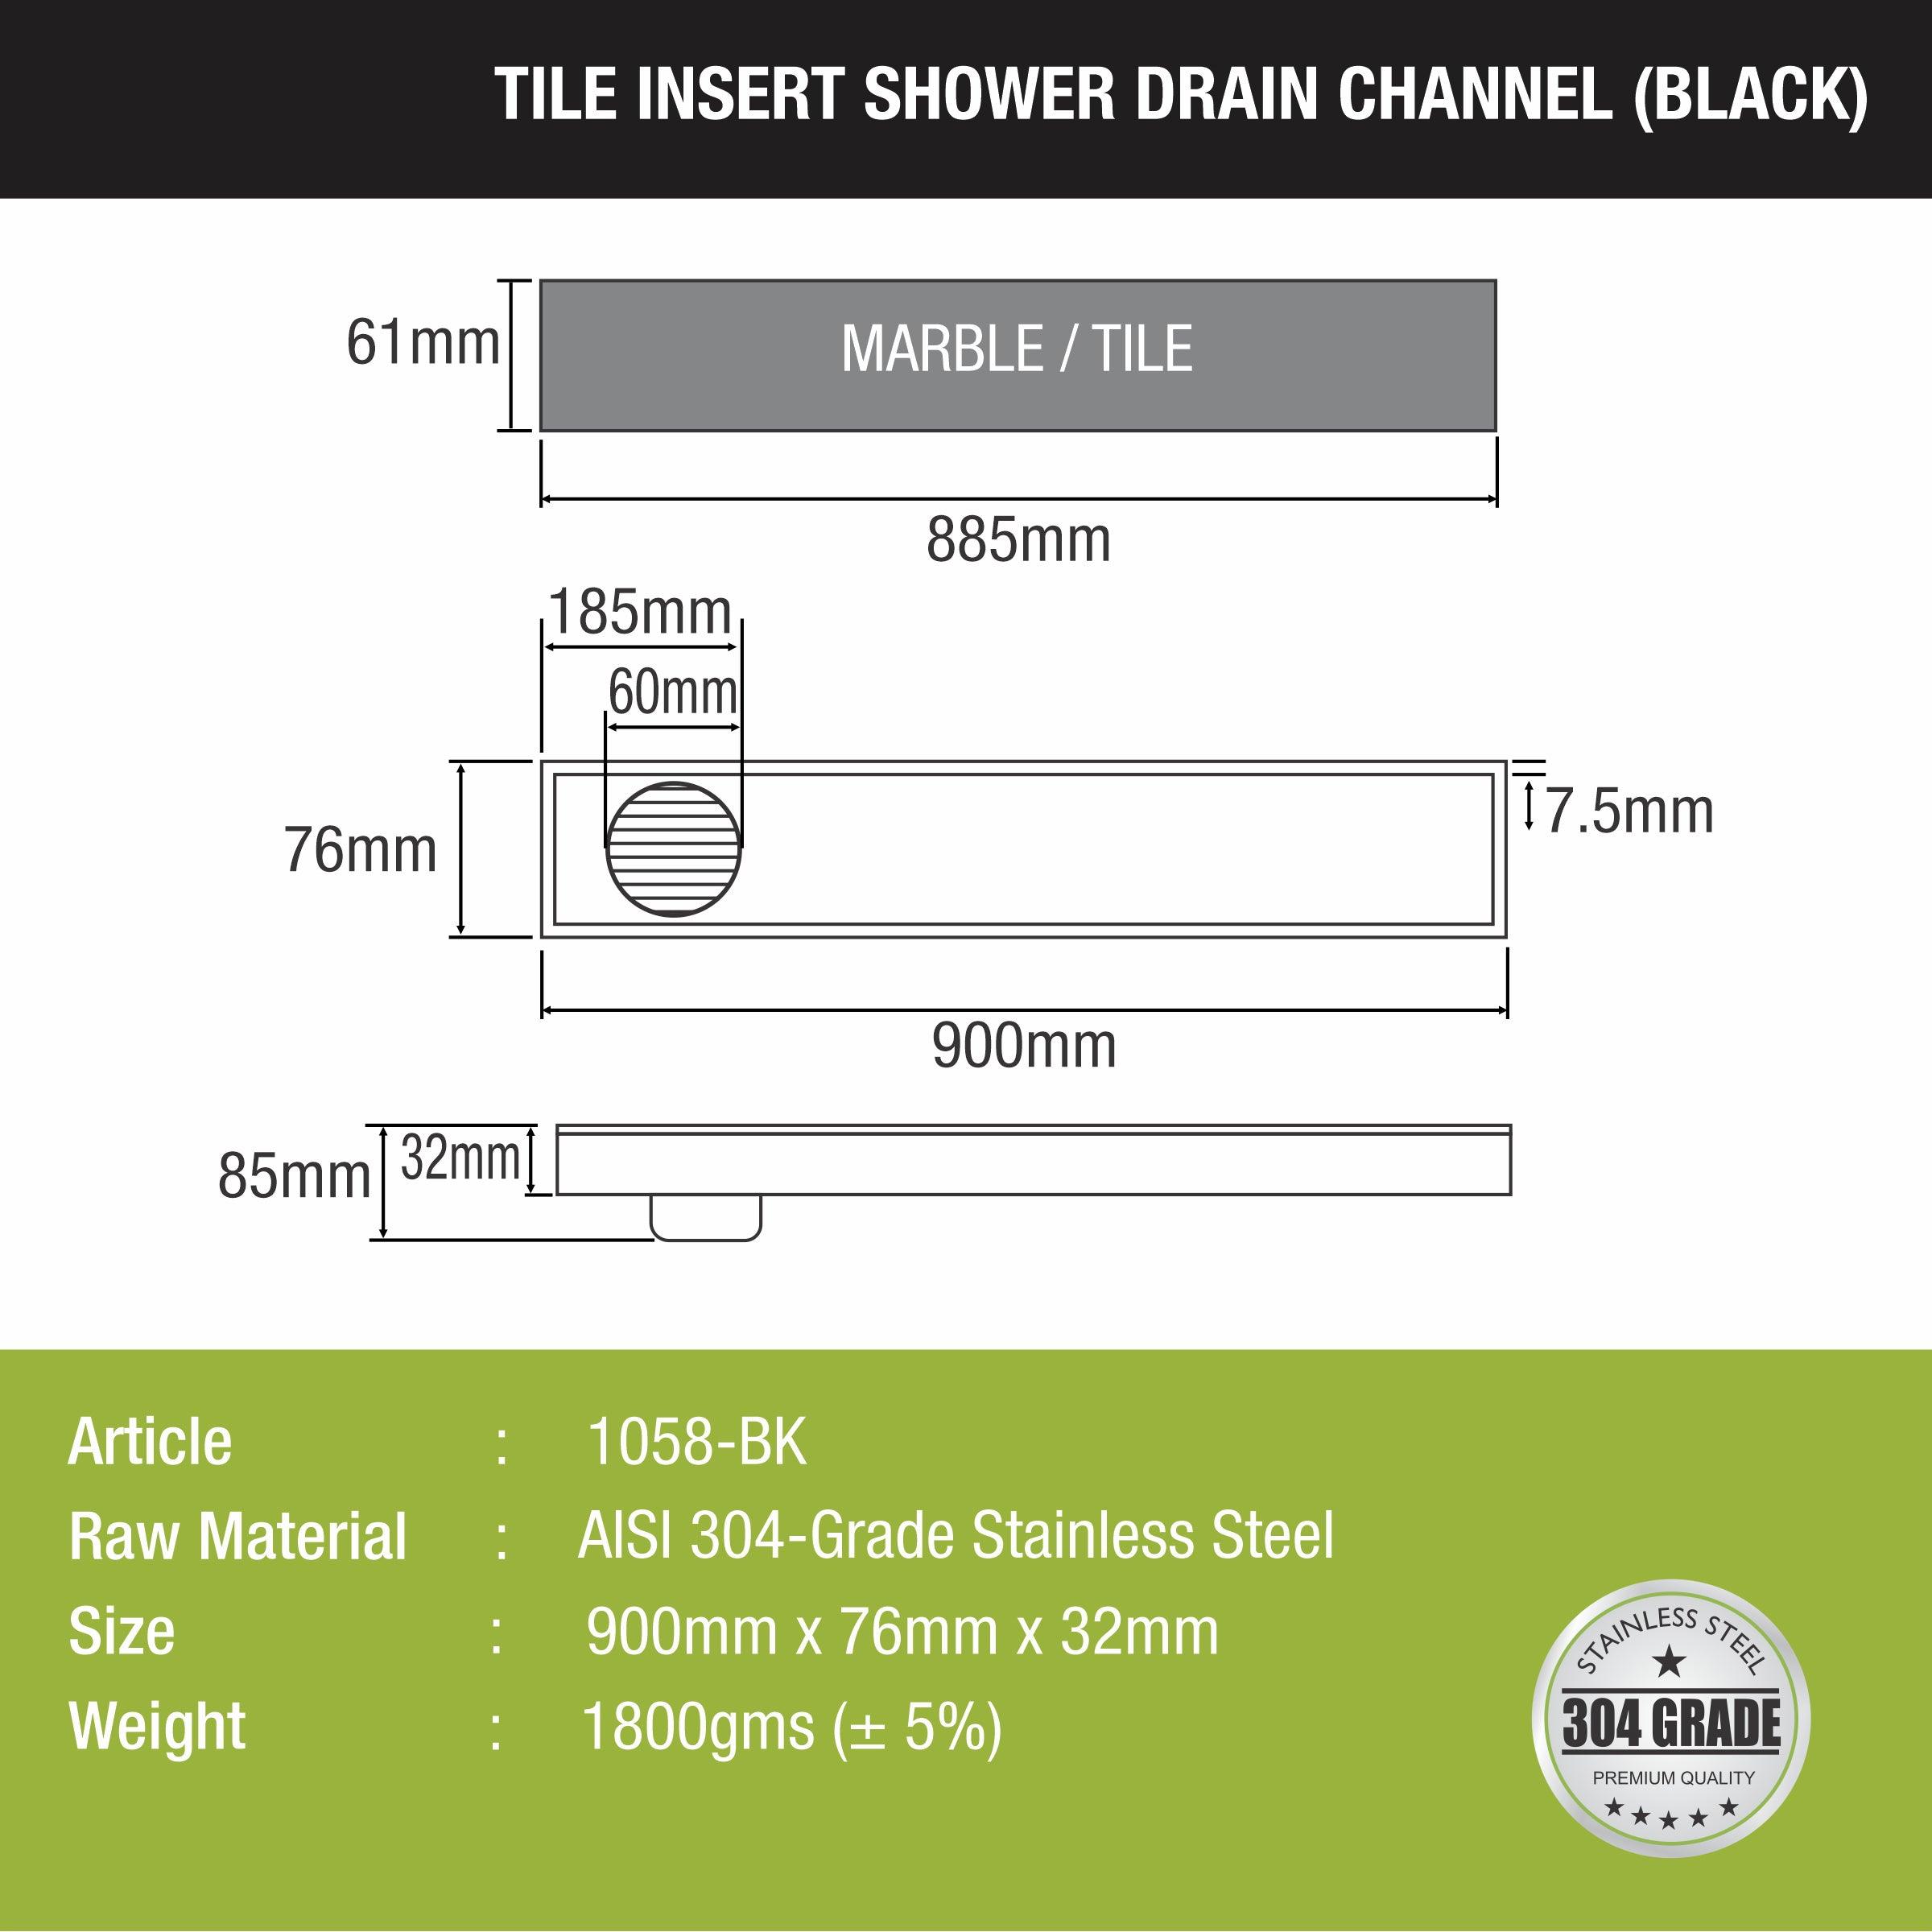 Tile Insert Shower Drain Channel - Black (36 x 3 Inches size and measurement